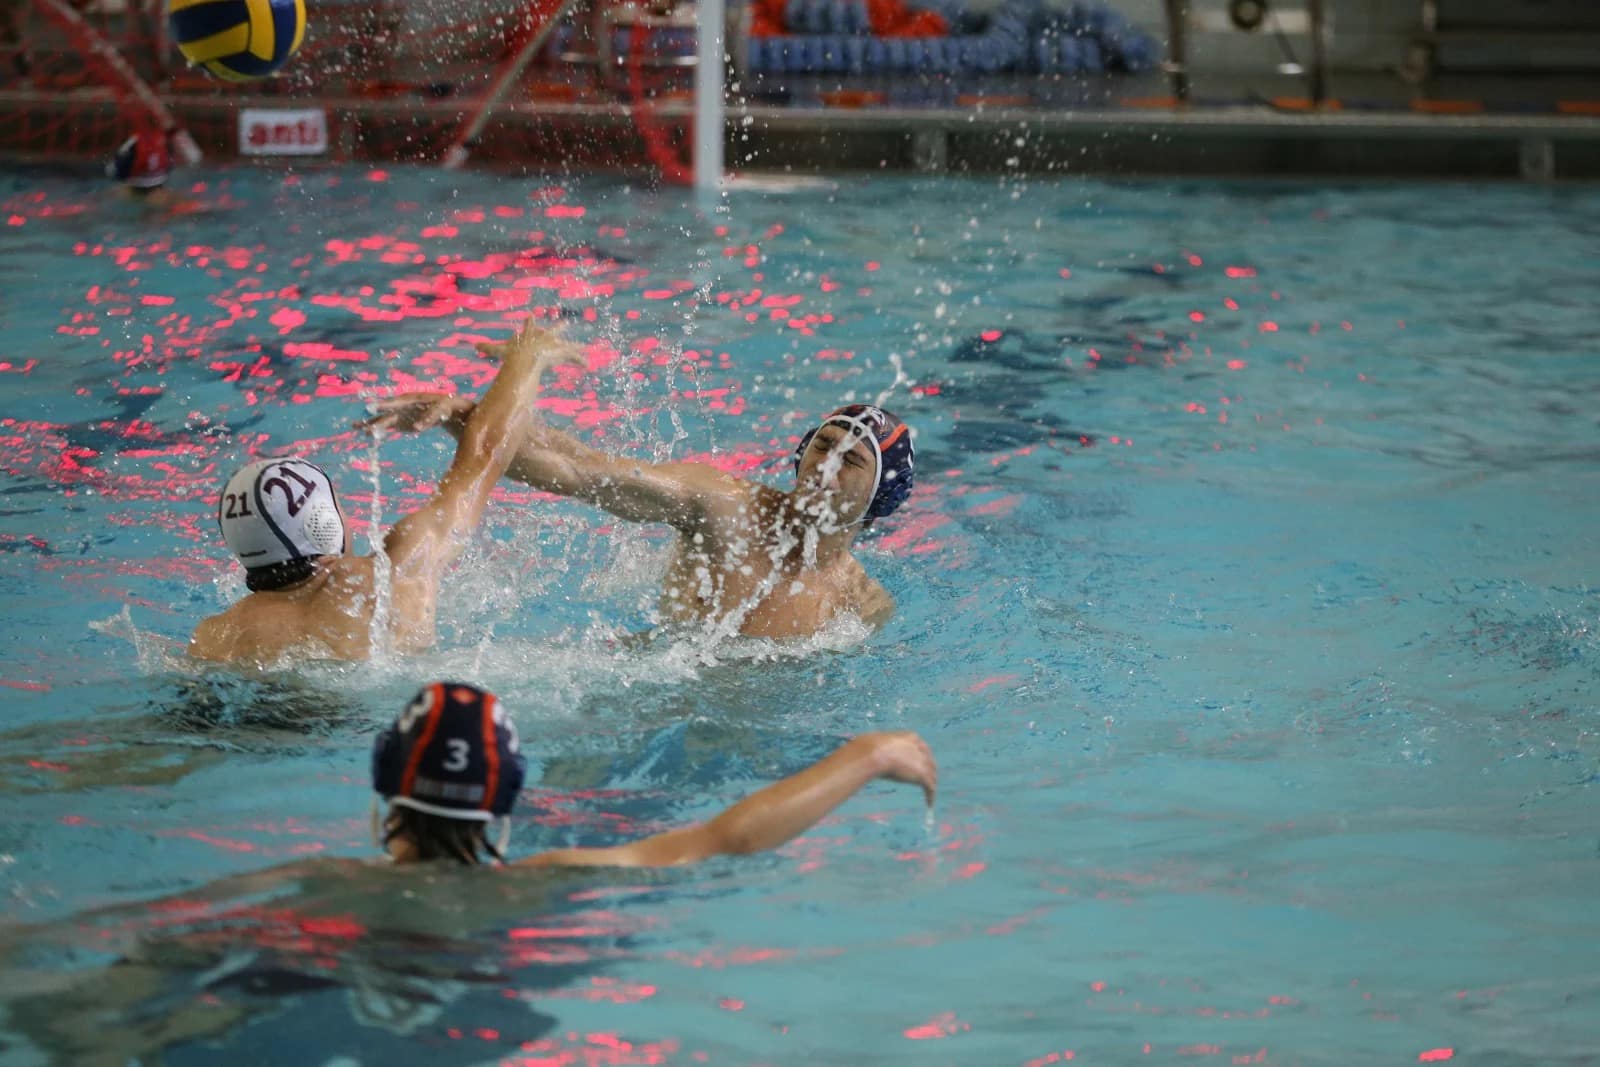 Water polo players in the pool during a match